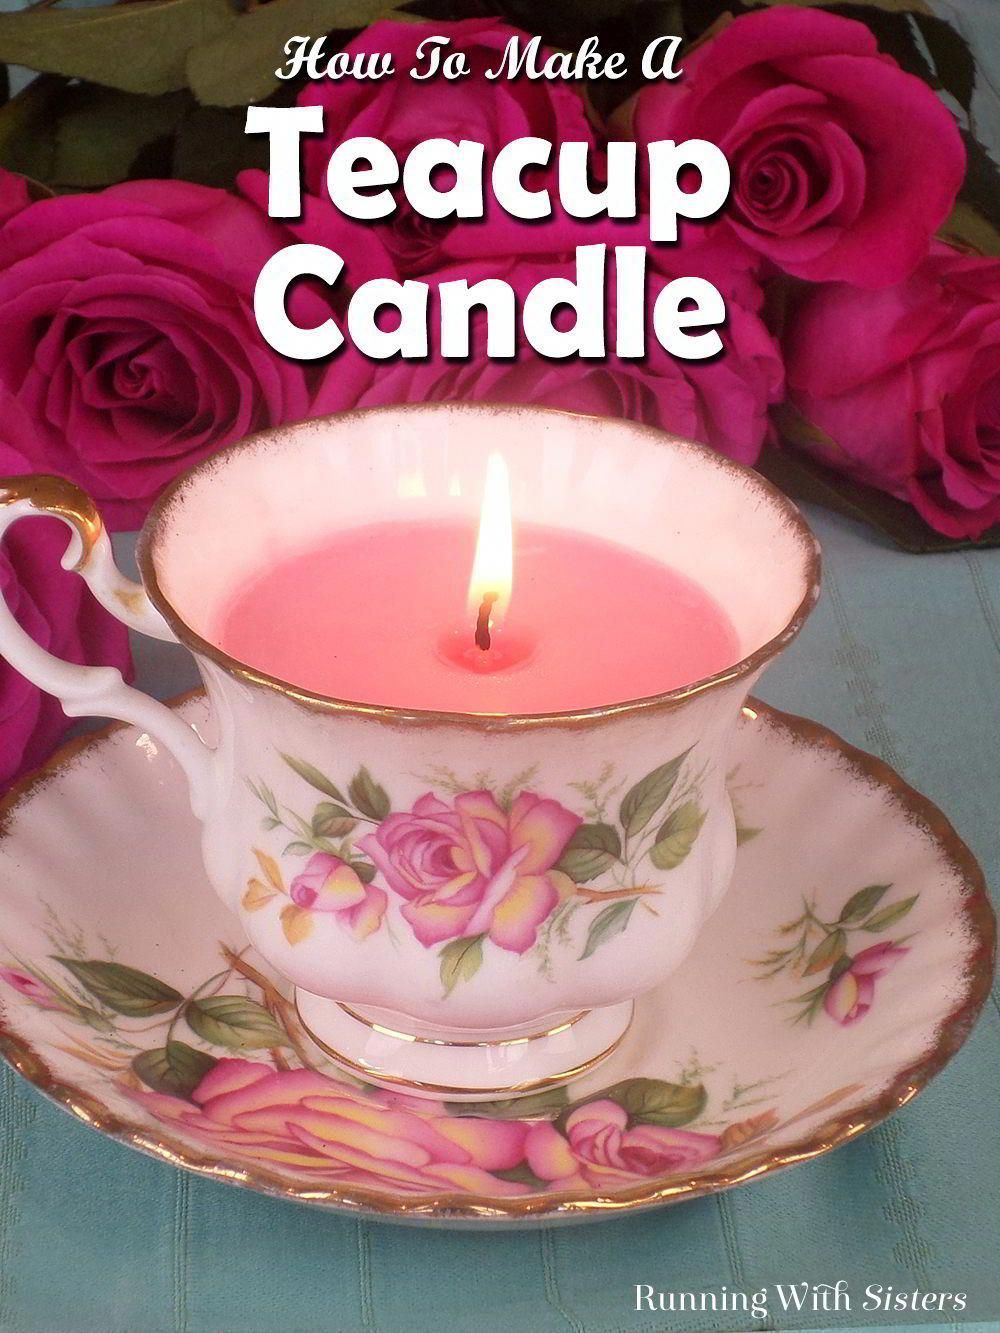 How To Make A Vintage Teacup Candle - Running With Sisters - How To Make A Vintage Teacup Candle - Running With Sisters -   15 diy Candles step by step ideas